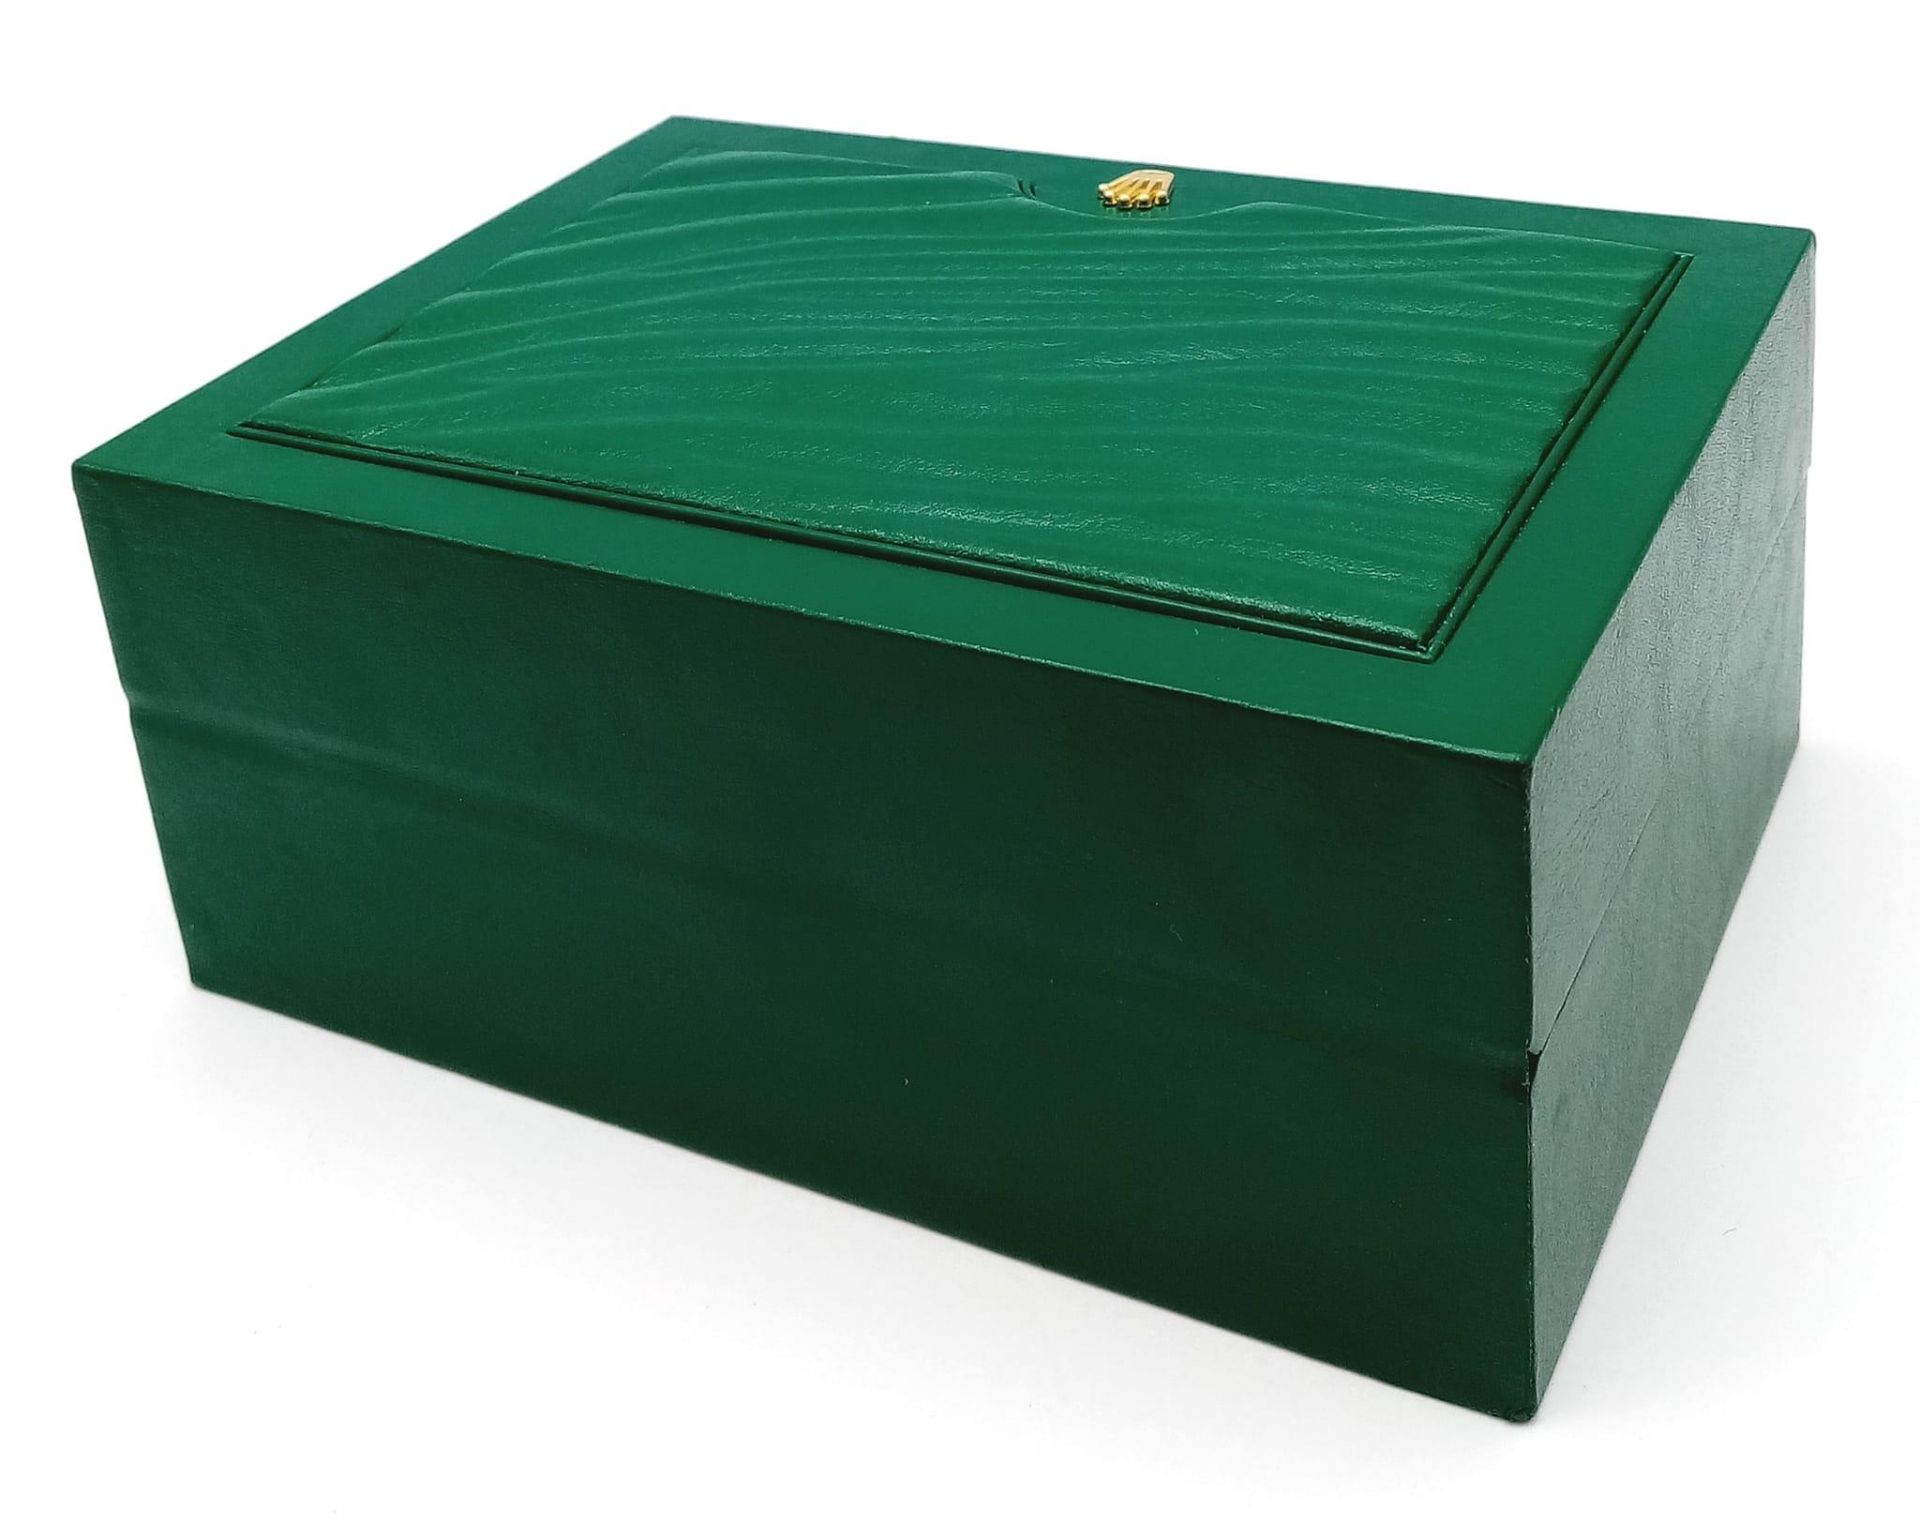 A Rolex Watch Case. Green ruffled exterior. Single watch space interior. 18cm x 13cm - Image 7 of 13